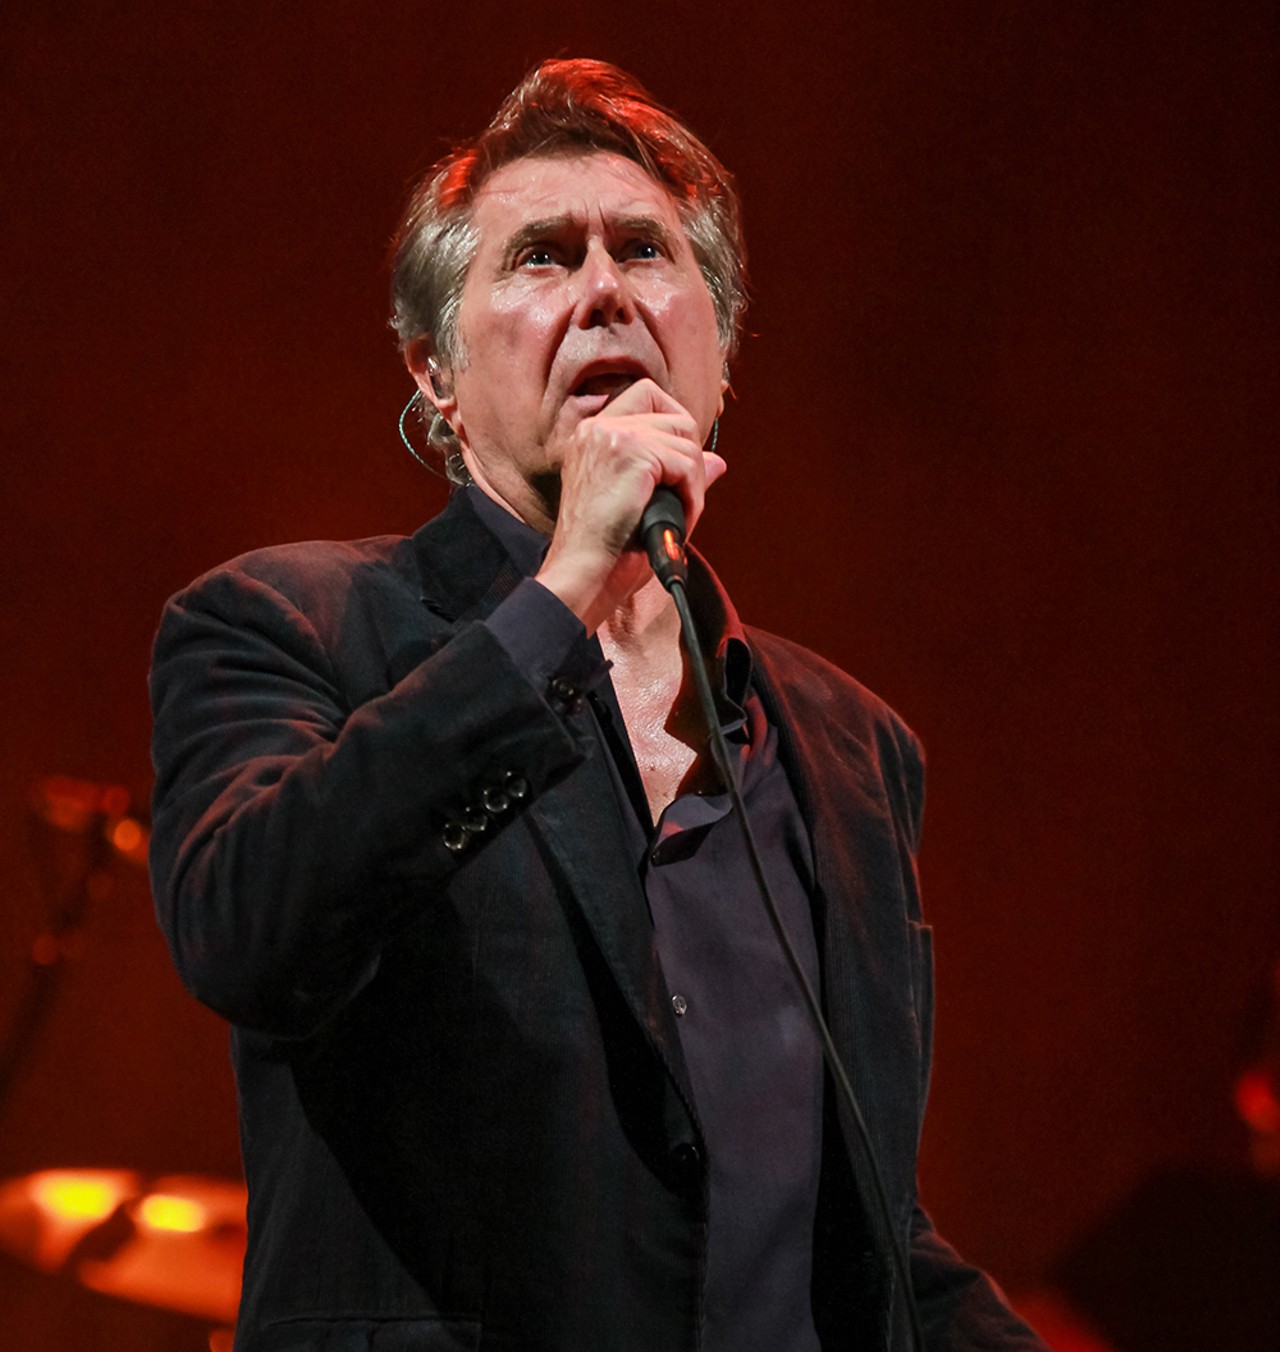 36 lovely photos from Bryan Ferry @ Fox Theatre